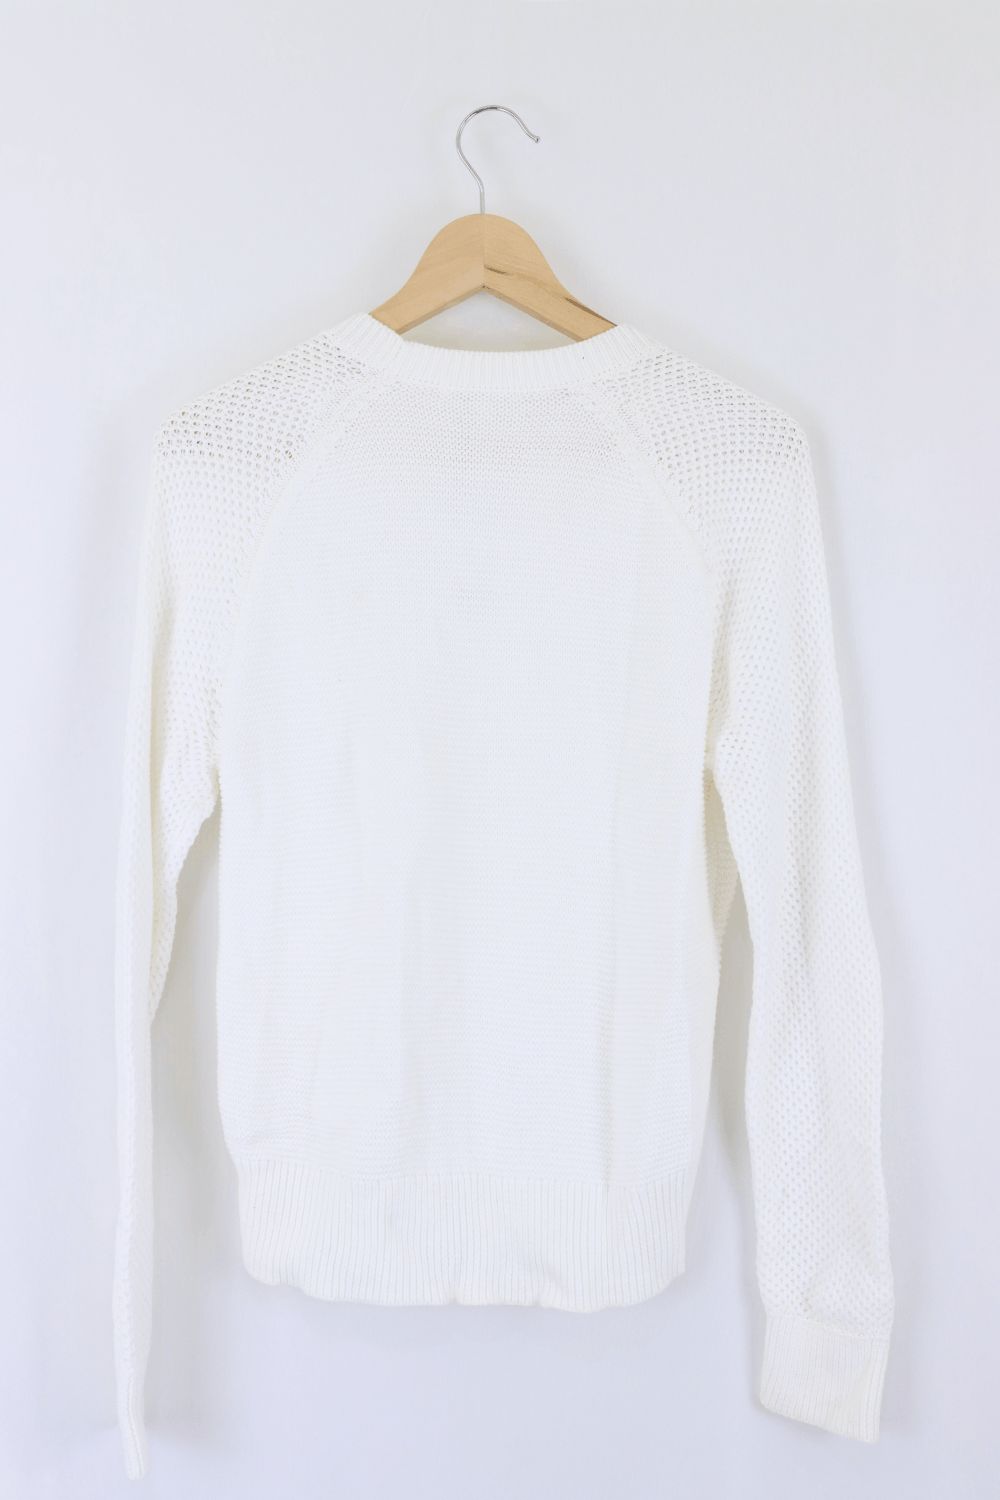 Uniqlo White Knitted Jumper M